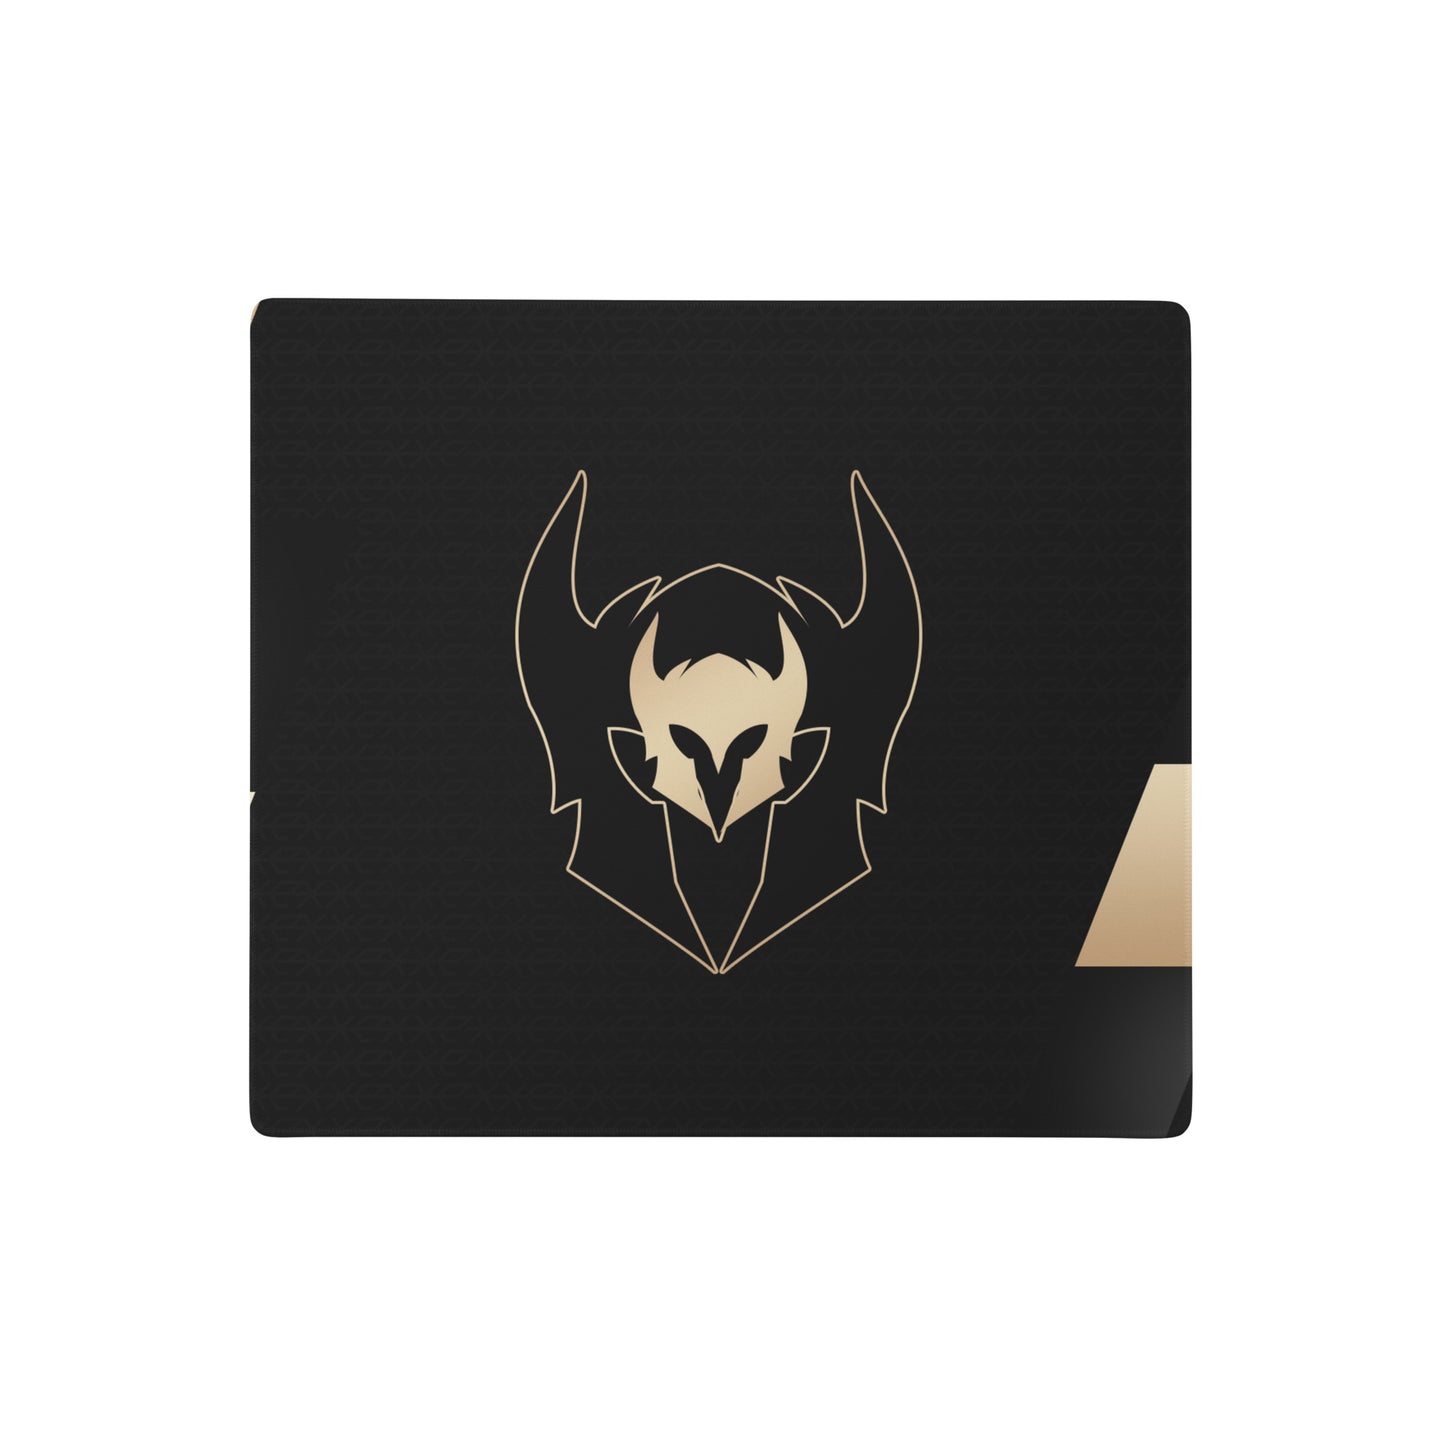 VALK Modern Gaming mouse pad